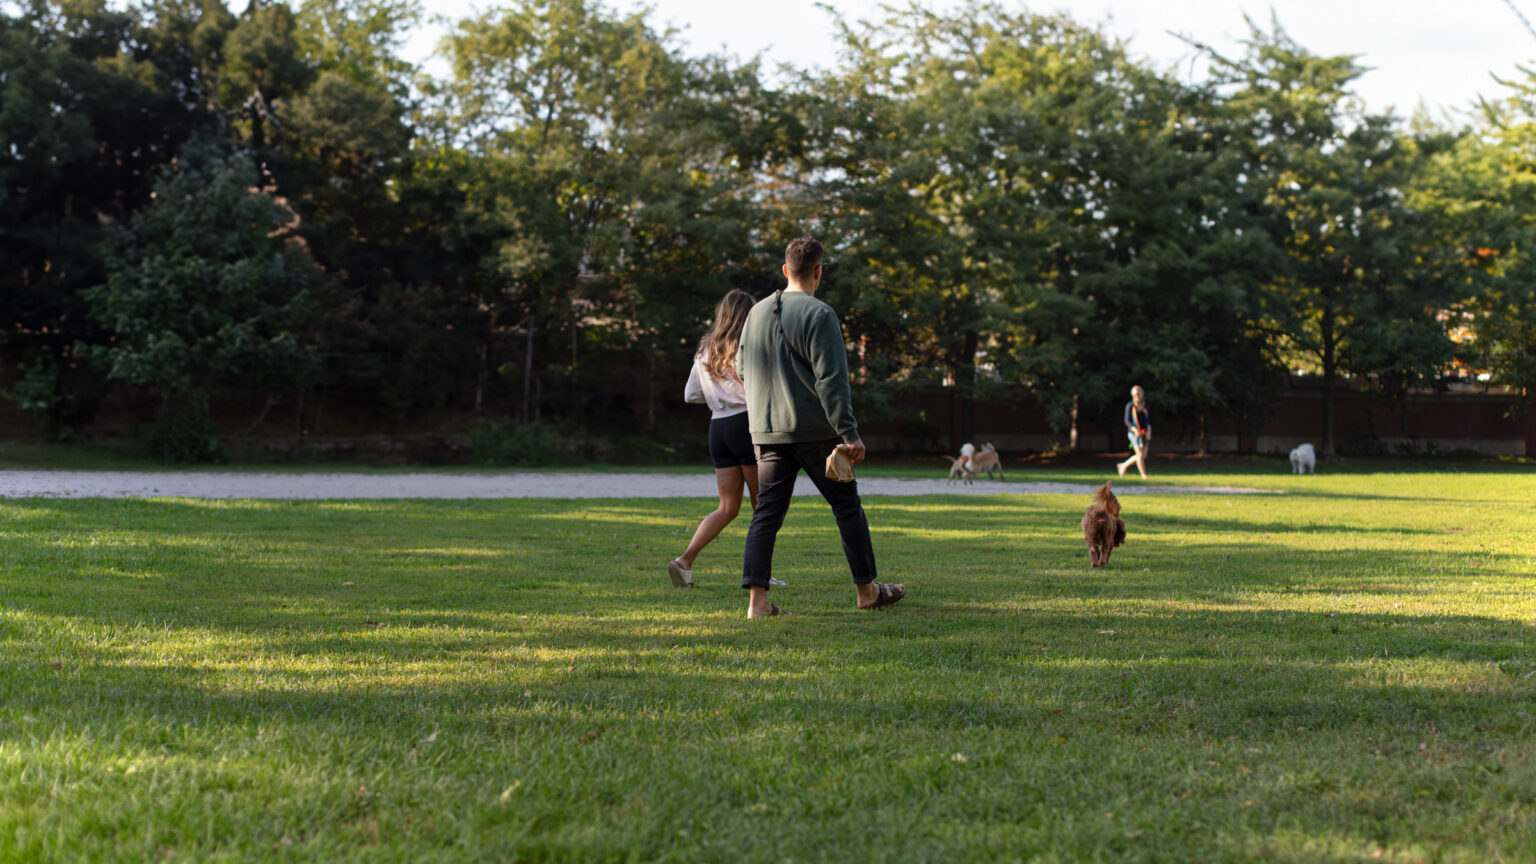 A young couple walks their dog through a lush green park in Toronto's Cactus and Steeles neighbourhood, near Resident's project site